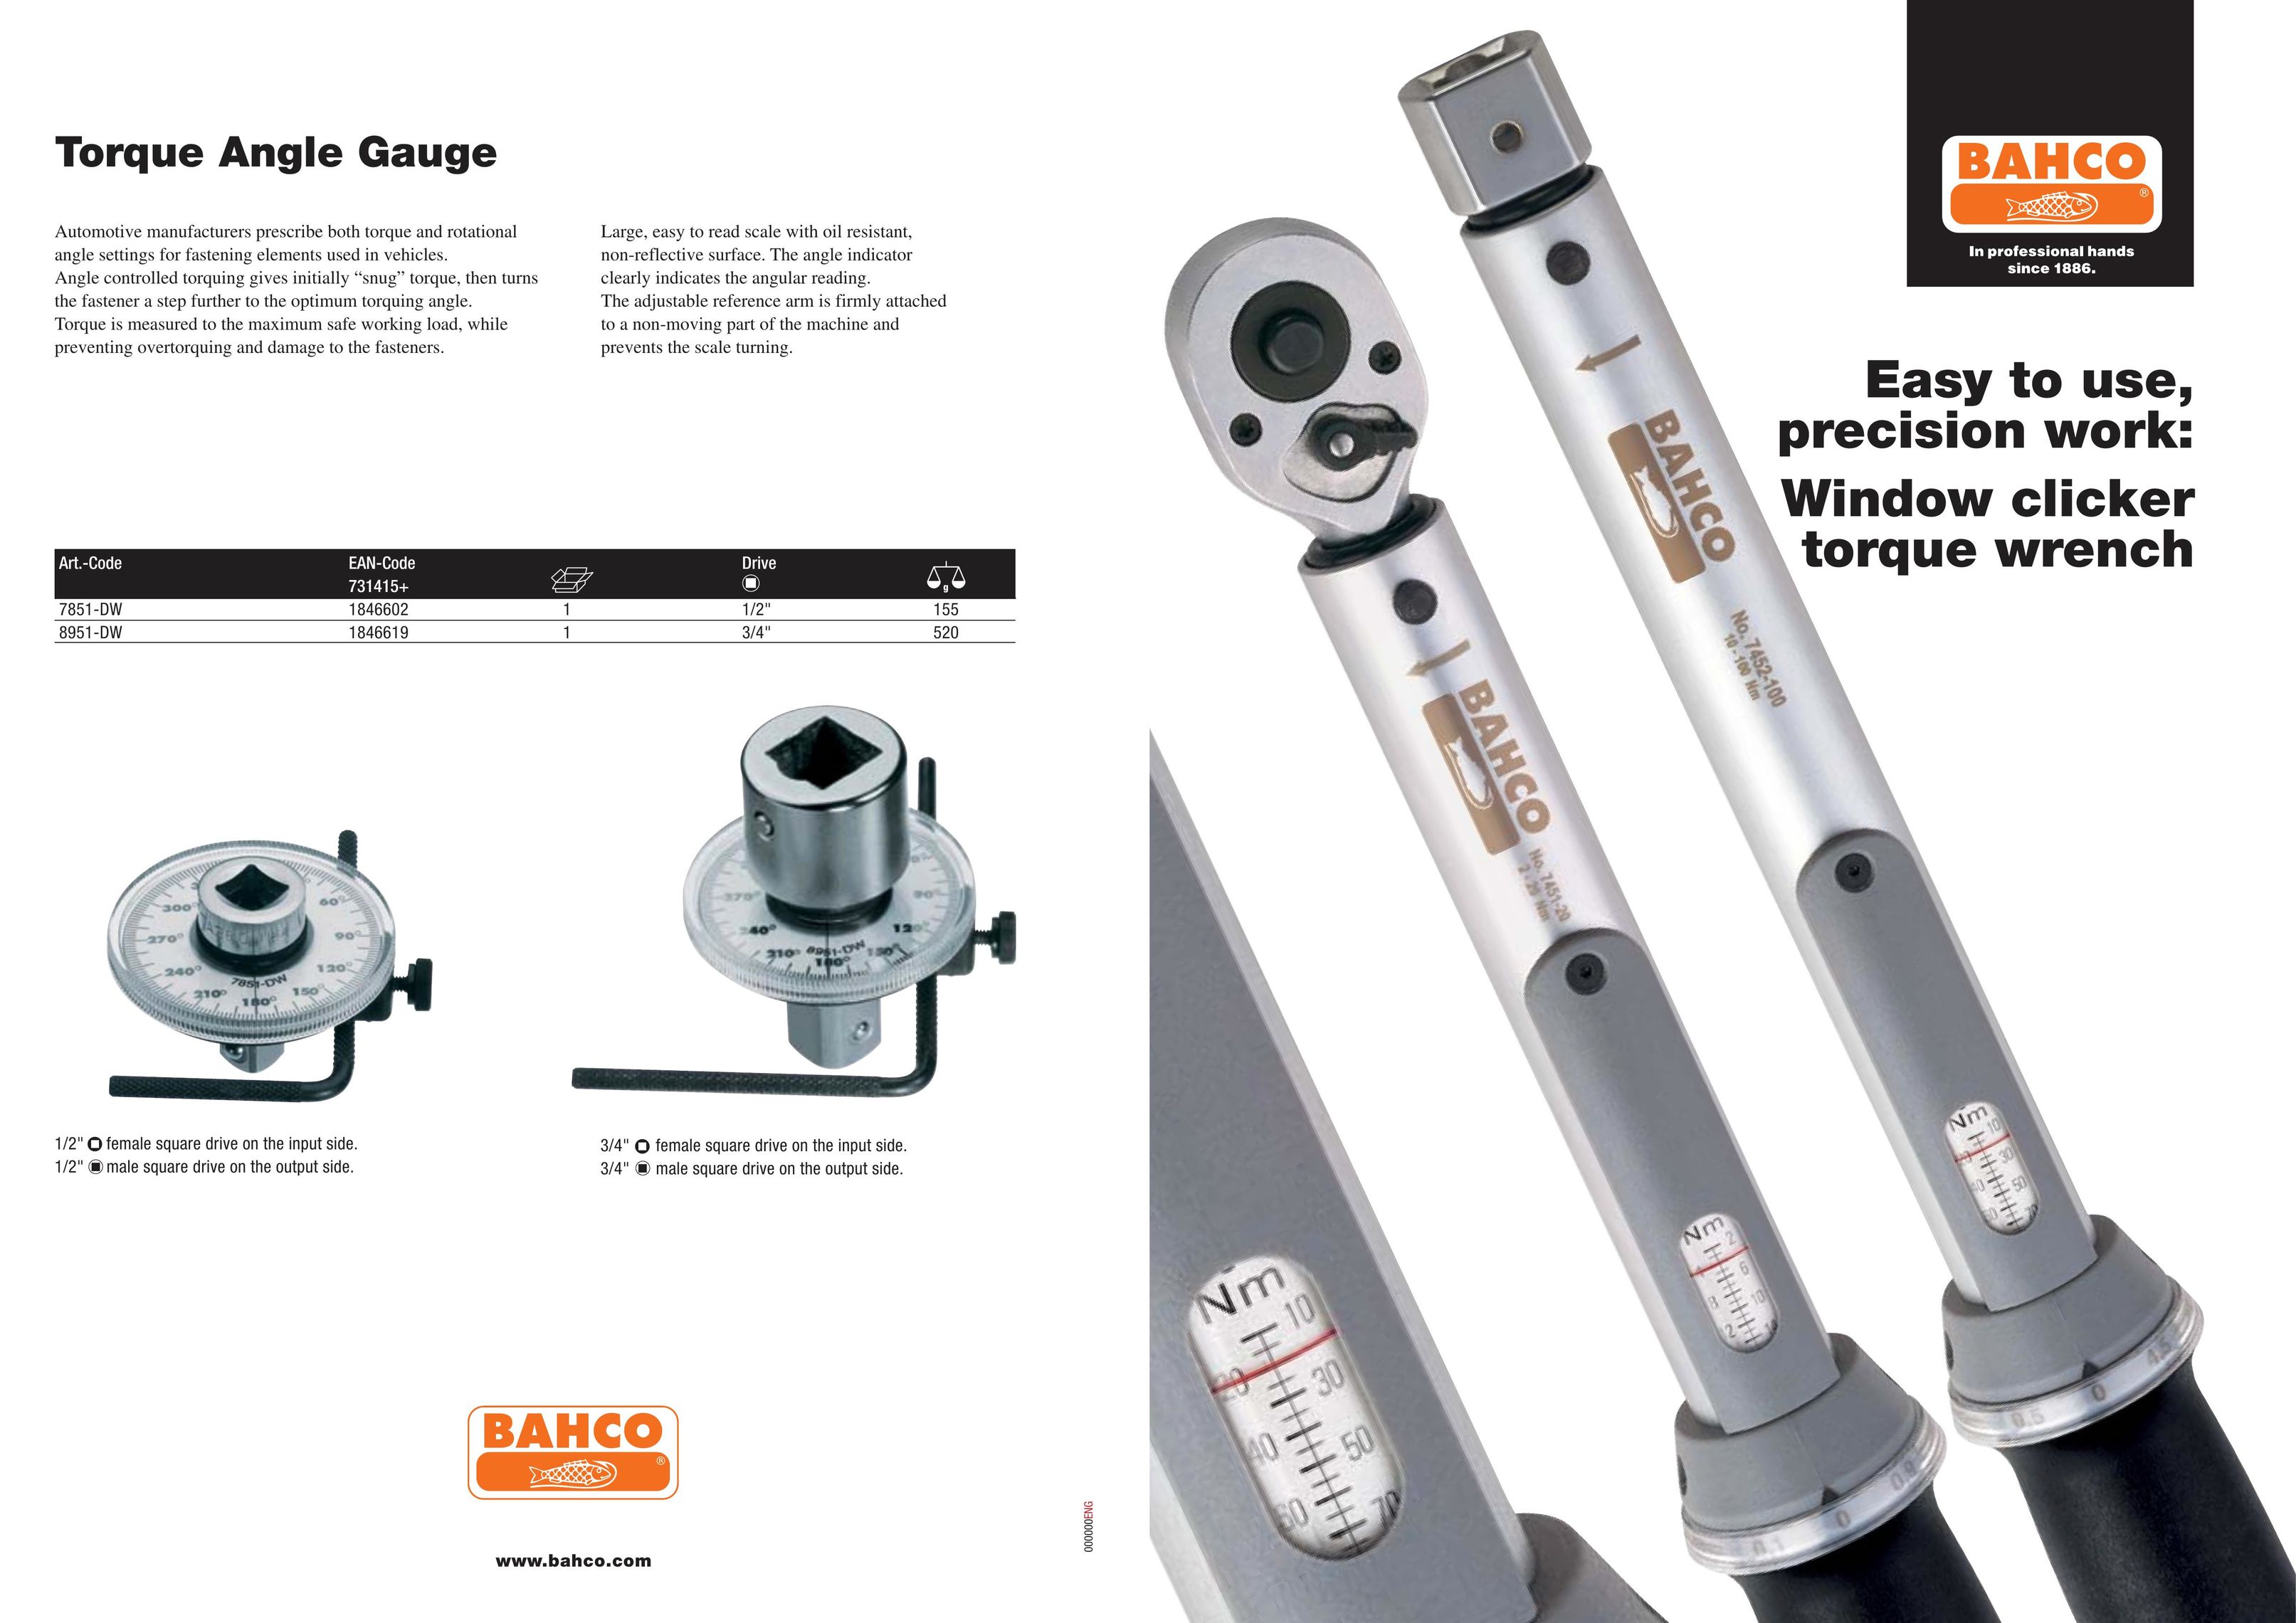 Bahco Torque Wrench Impact Driver User Manual